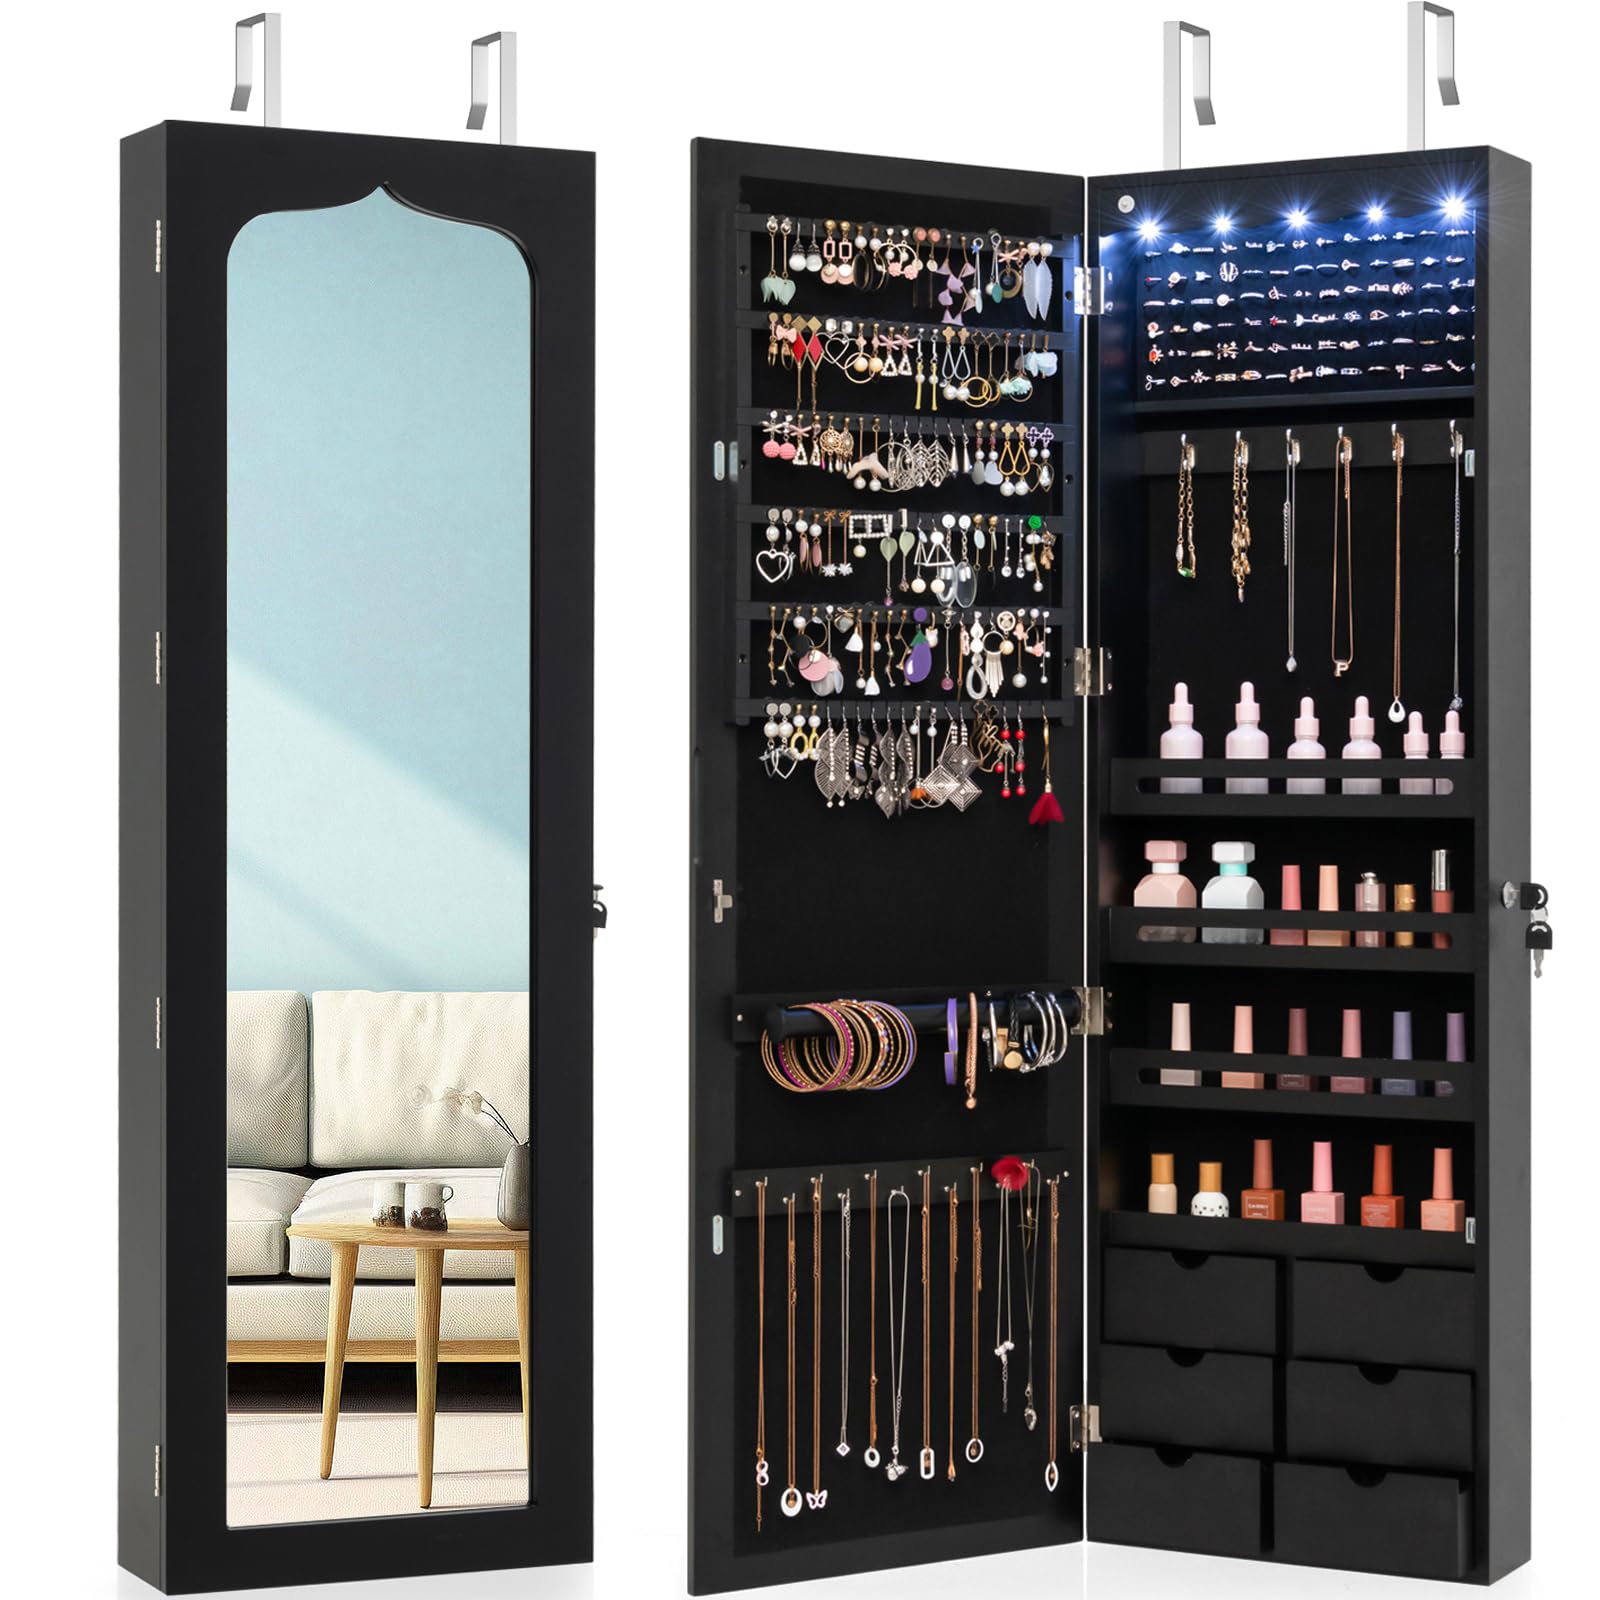 CHARMAID 5 LEDs Mirror Jewelry Armoire Wall Mounted Door Hanging, Lockable Jewelry Cabinet with 47.5"H Full Length Mirror